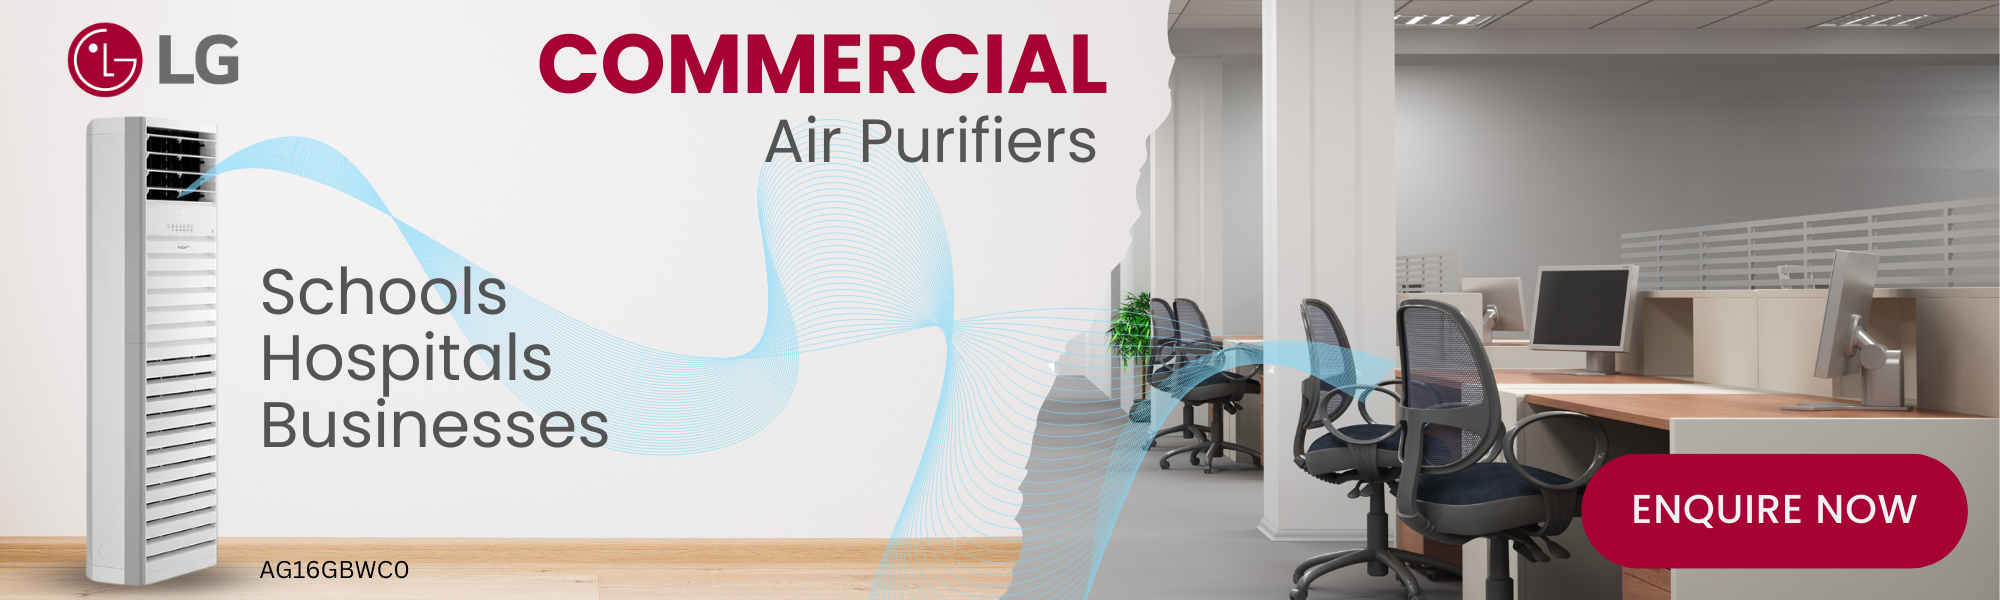 LG - COMMERCIAL AIR PURIFIERS!